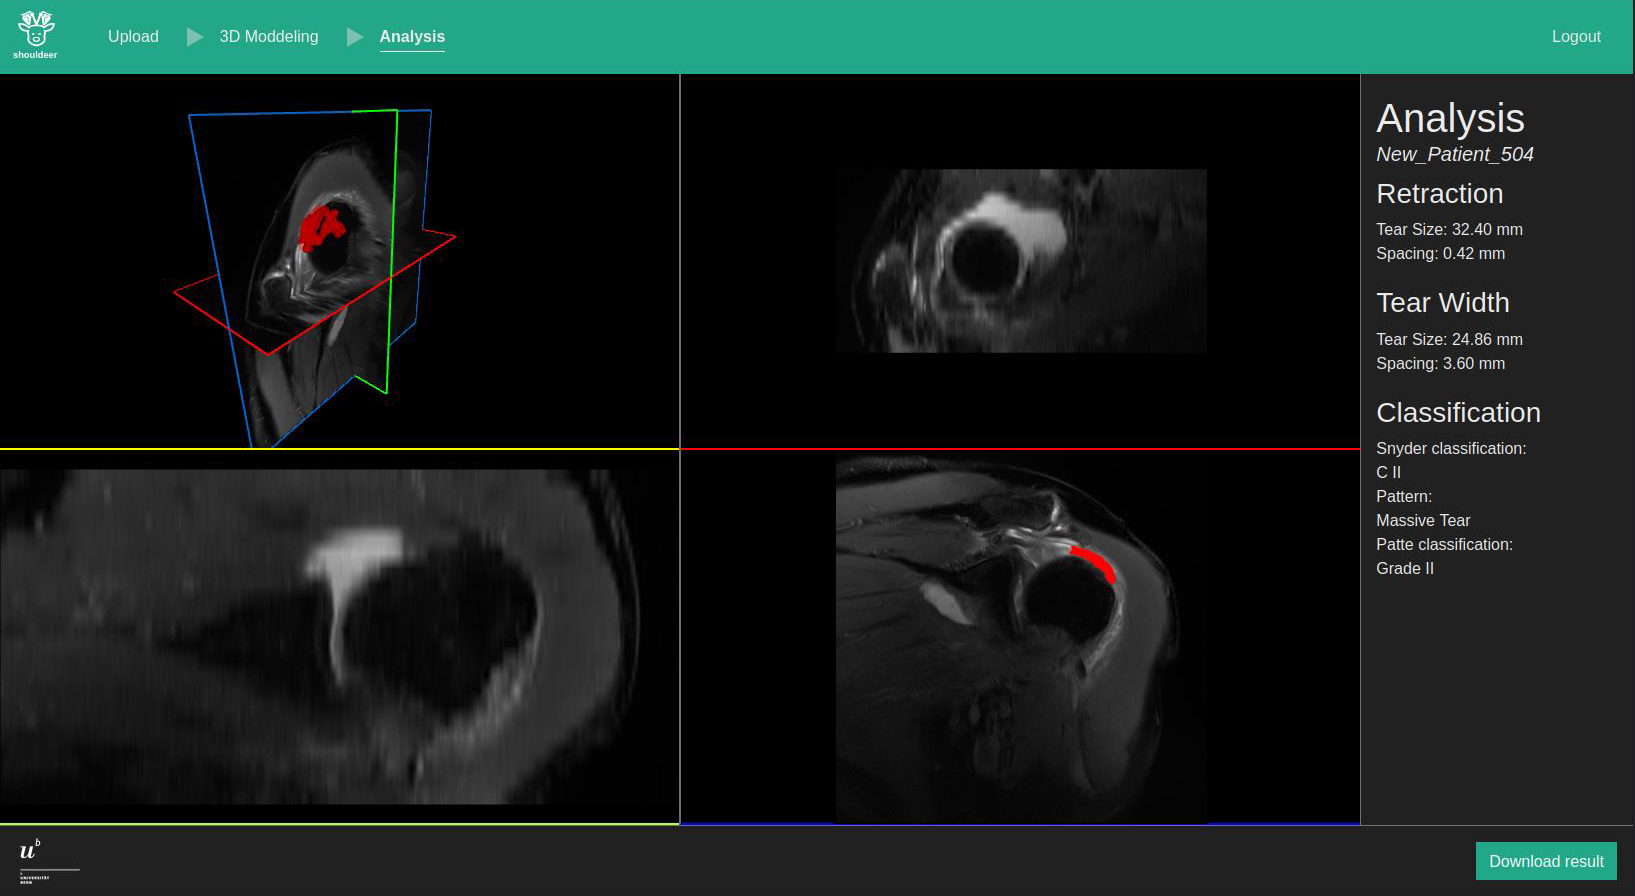 Our software showing the segmentation of a torn tendon from MRI data